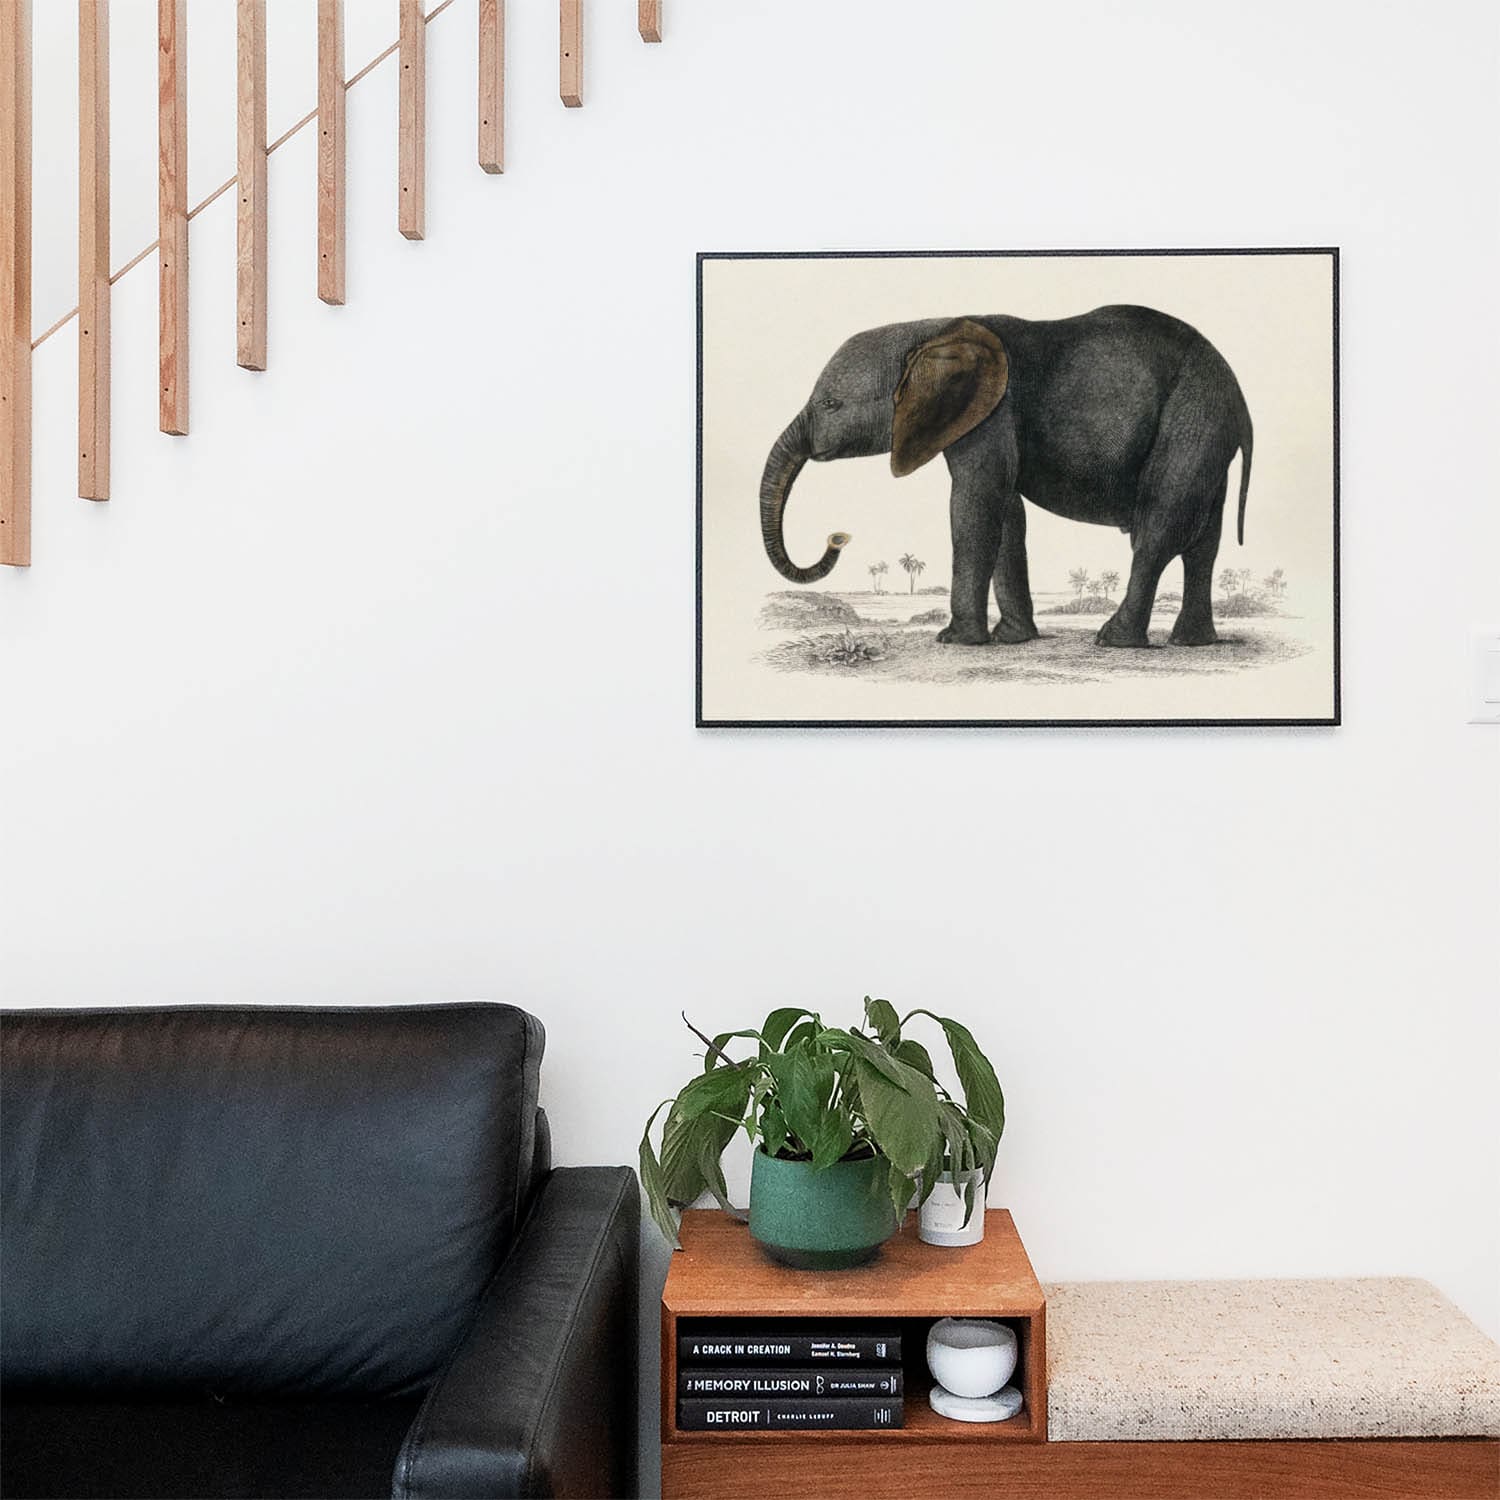 Living space with a black leather couch and table with a plant and books below a staircase featuring a framed picture of Cute Elephant